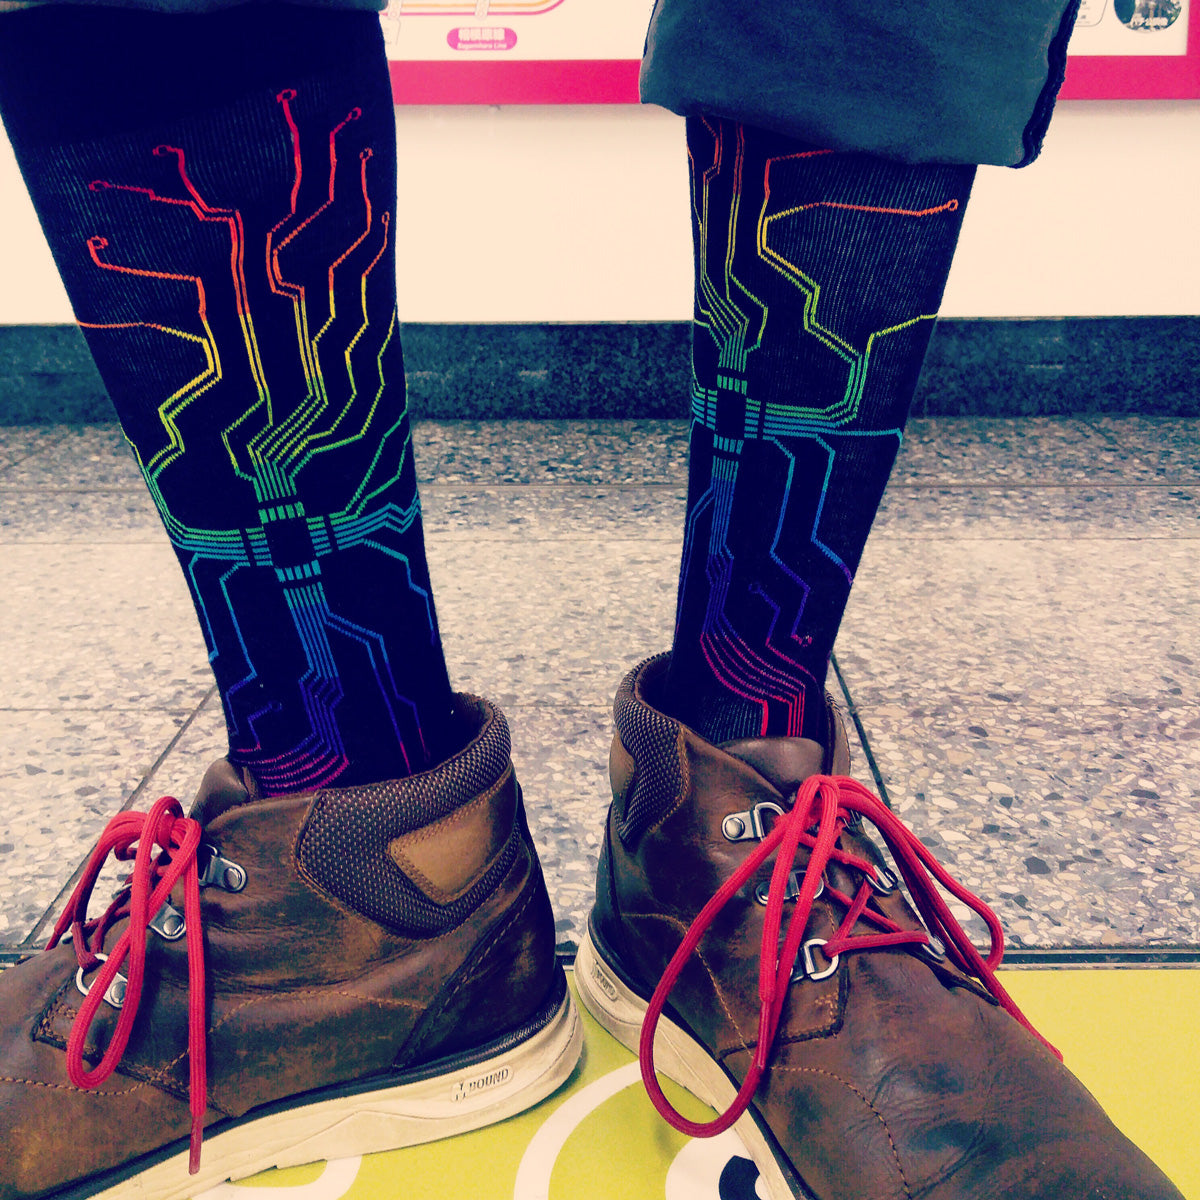 ModSock's collection of socks for grads includes these circuitboard socks with electronic circuitry in rainbow colors on a black background, perfect for any student or graduate into computers or electrical engineering.